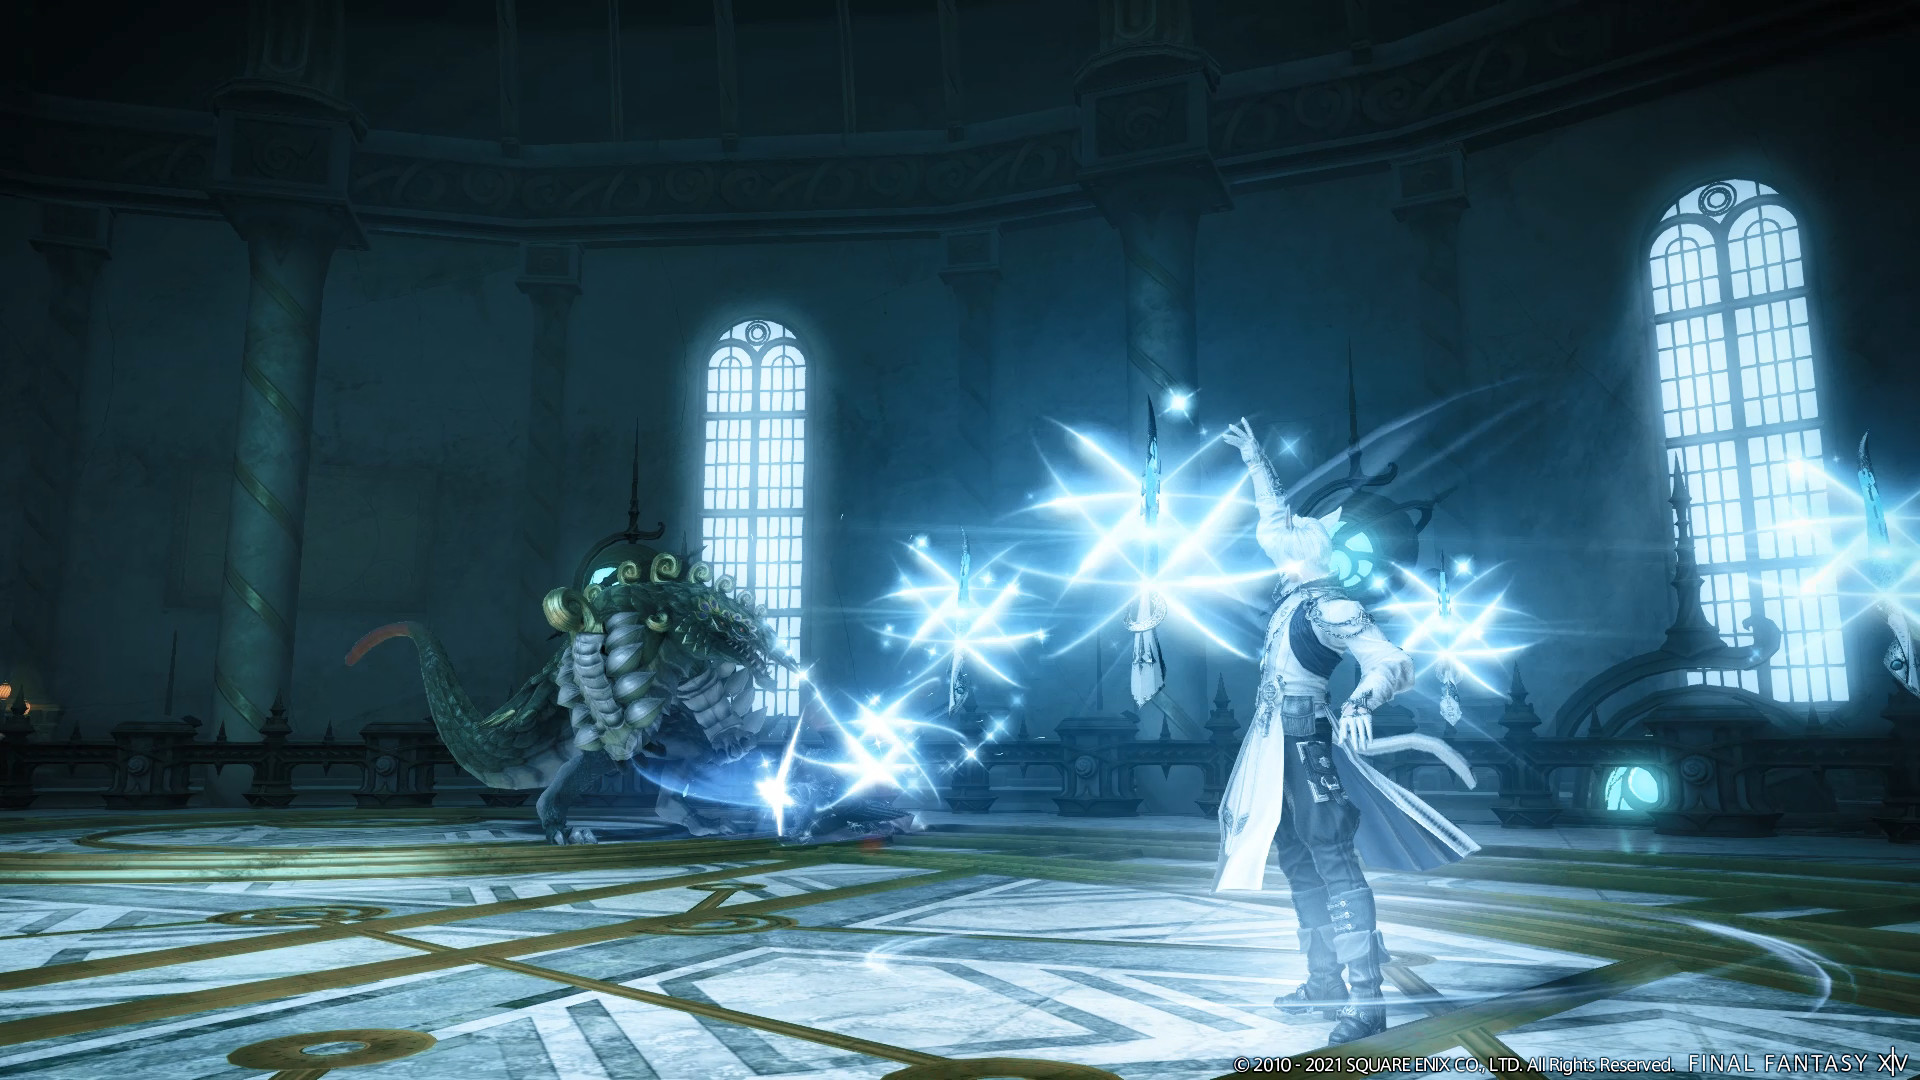 FFXIV’s last pre-Endwalker Live Letter details crafting and PvP updates – here’s when to watch